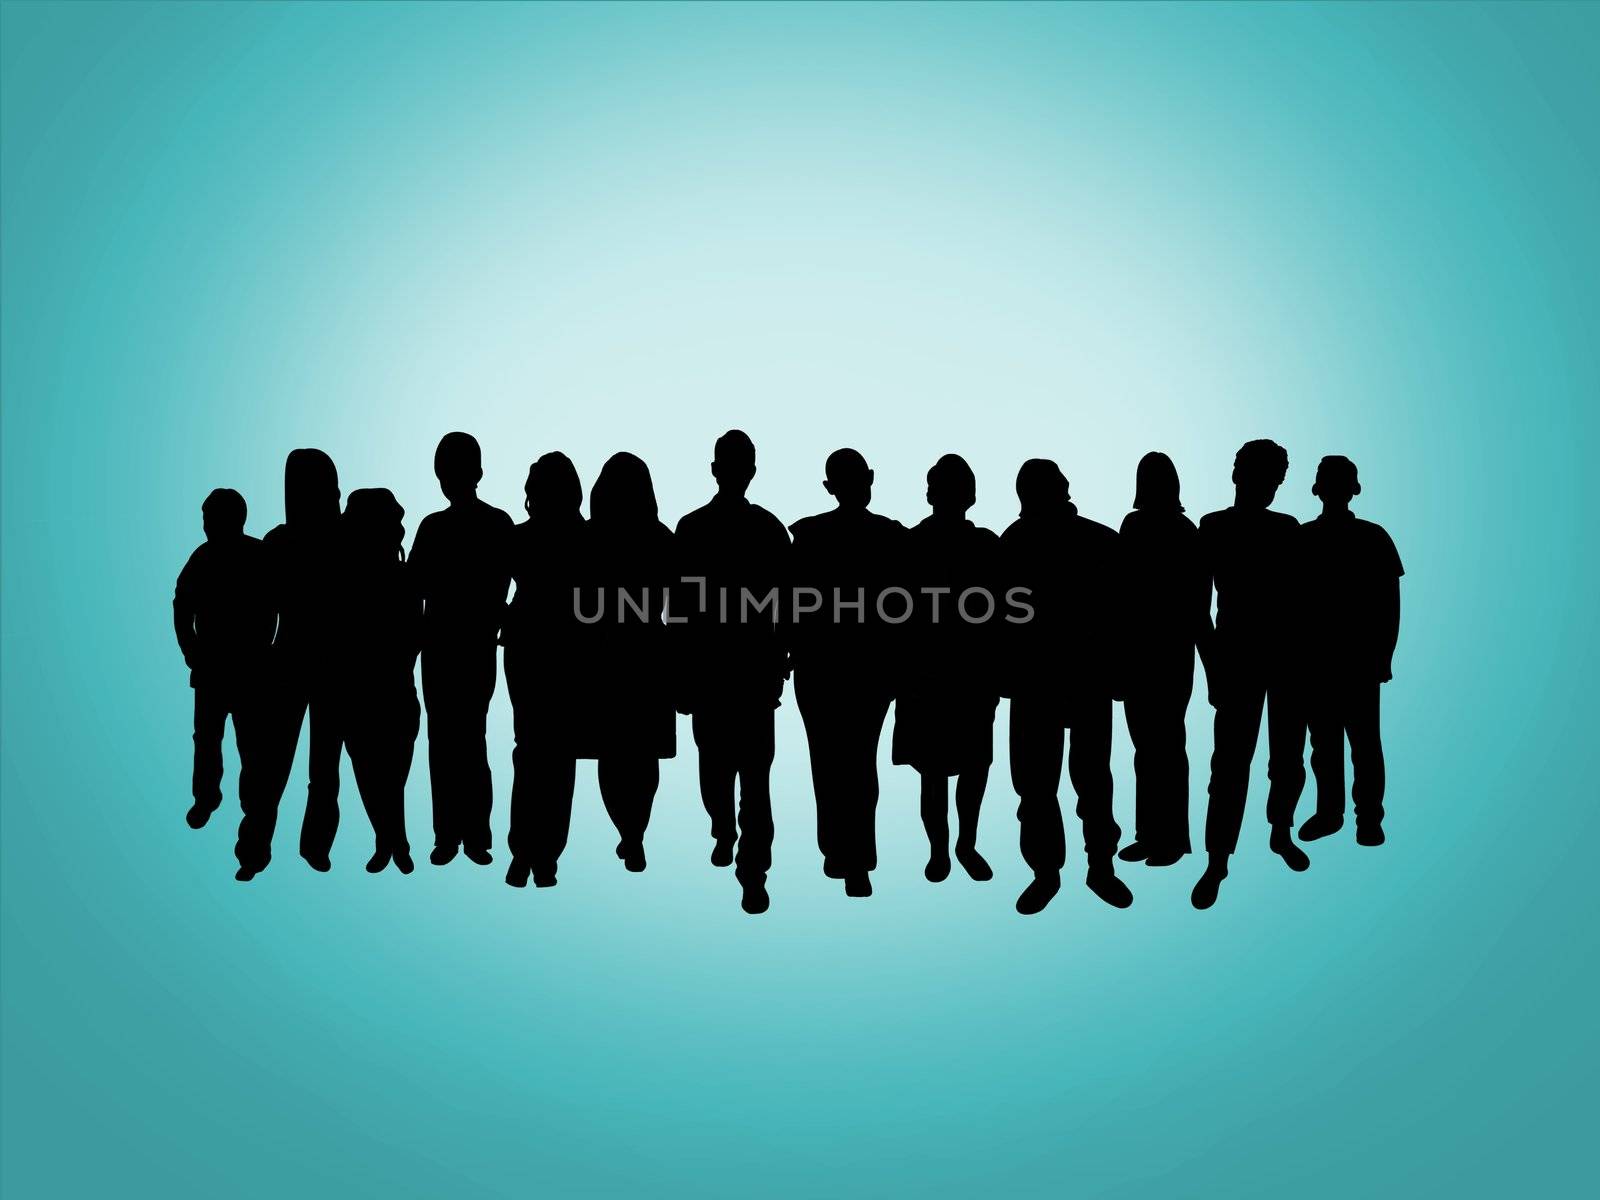 Illustration of a crowd of people